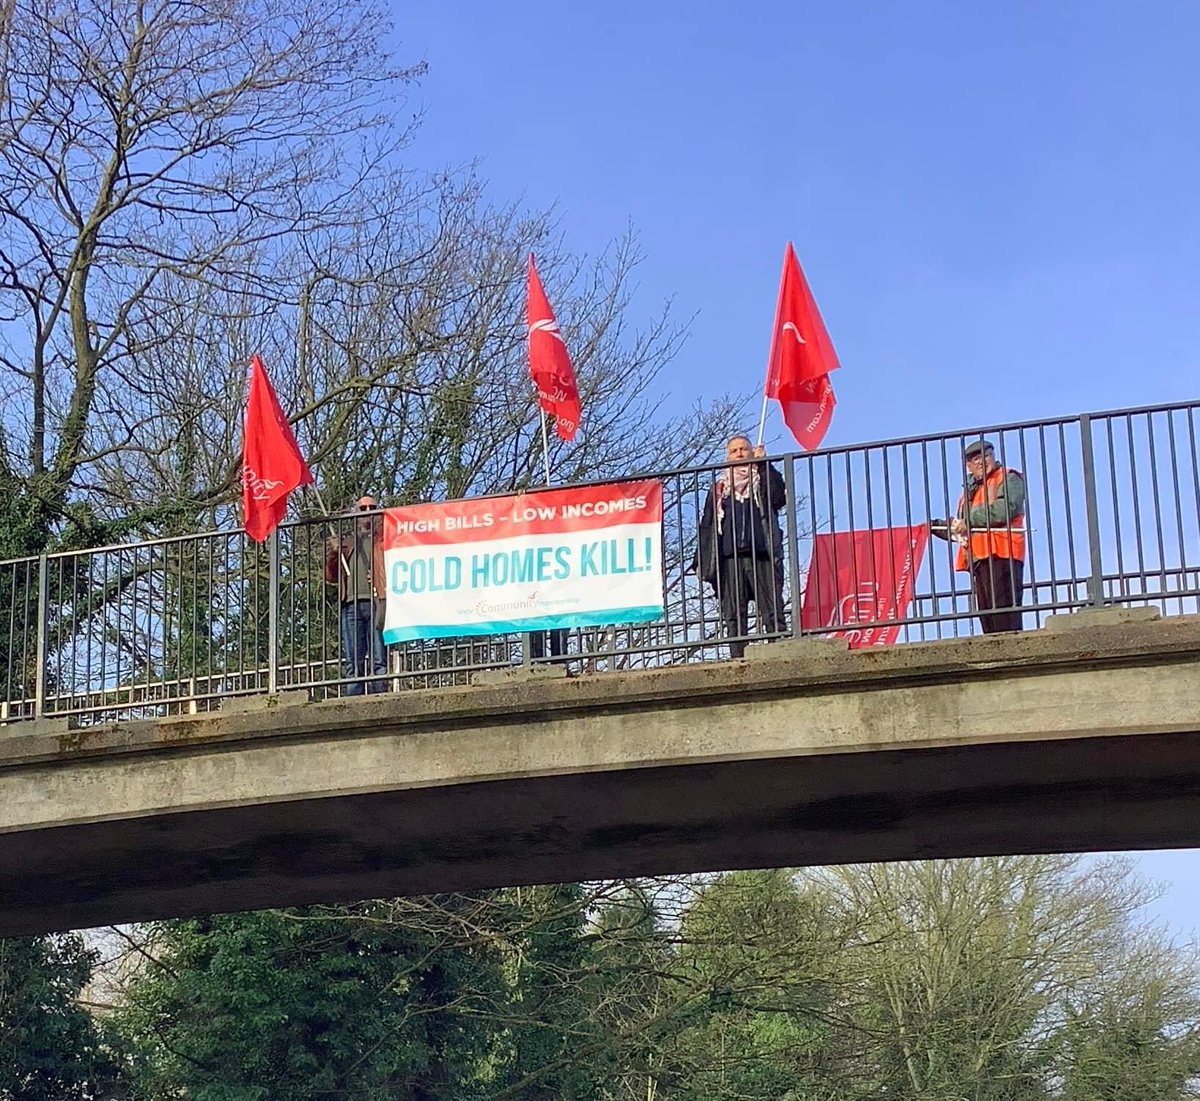 Banner drop in Chesterfield this morning ✊

Unite Community have kicked off the national day of action!

Over 20 events are expected nationwide fuelpovertyaction.org.uk

#ColdHomesKill #Unite4EnergyForAll